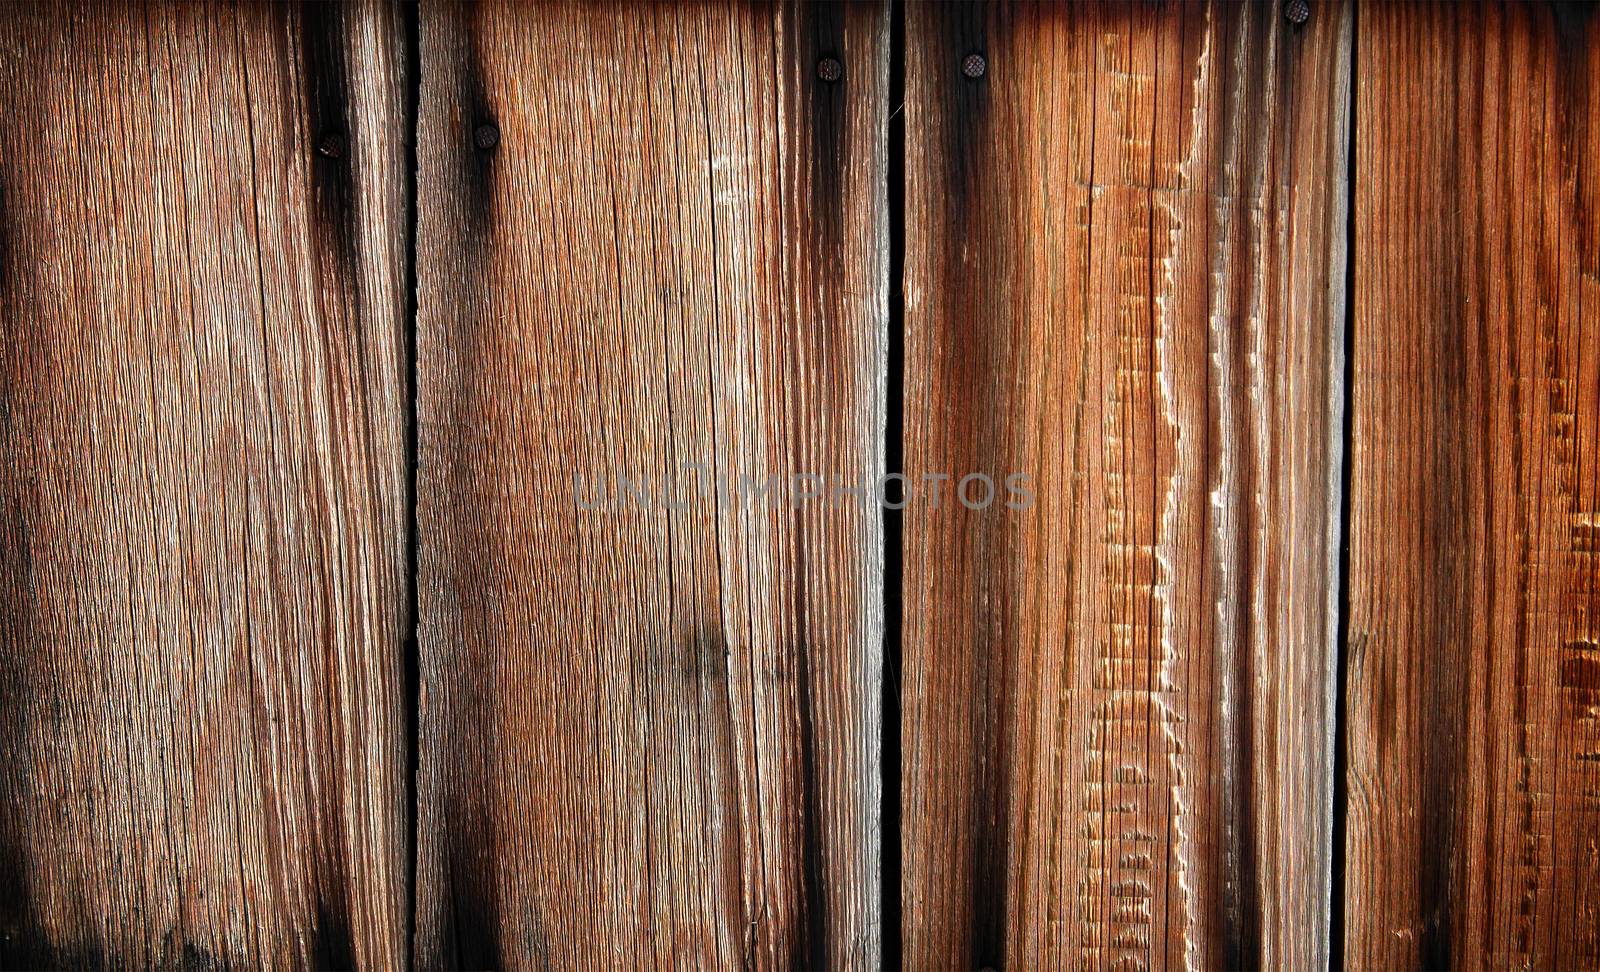 Wooden Background by sabphoto